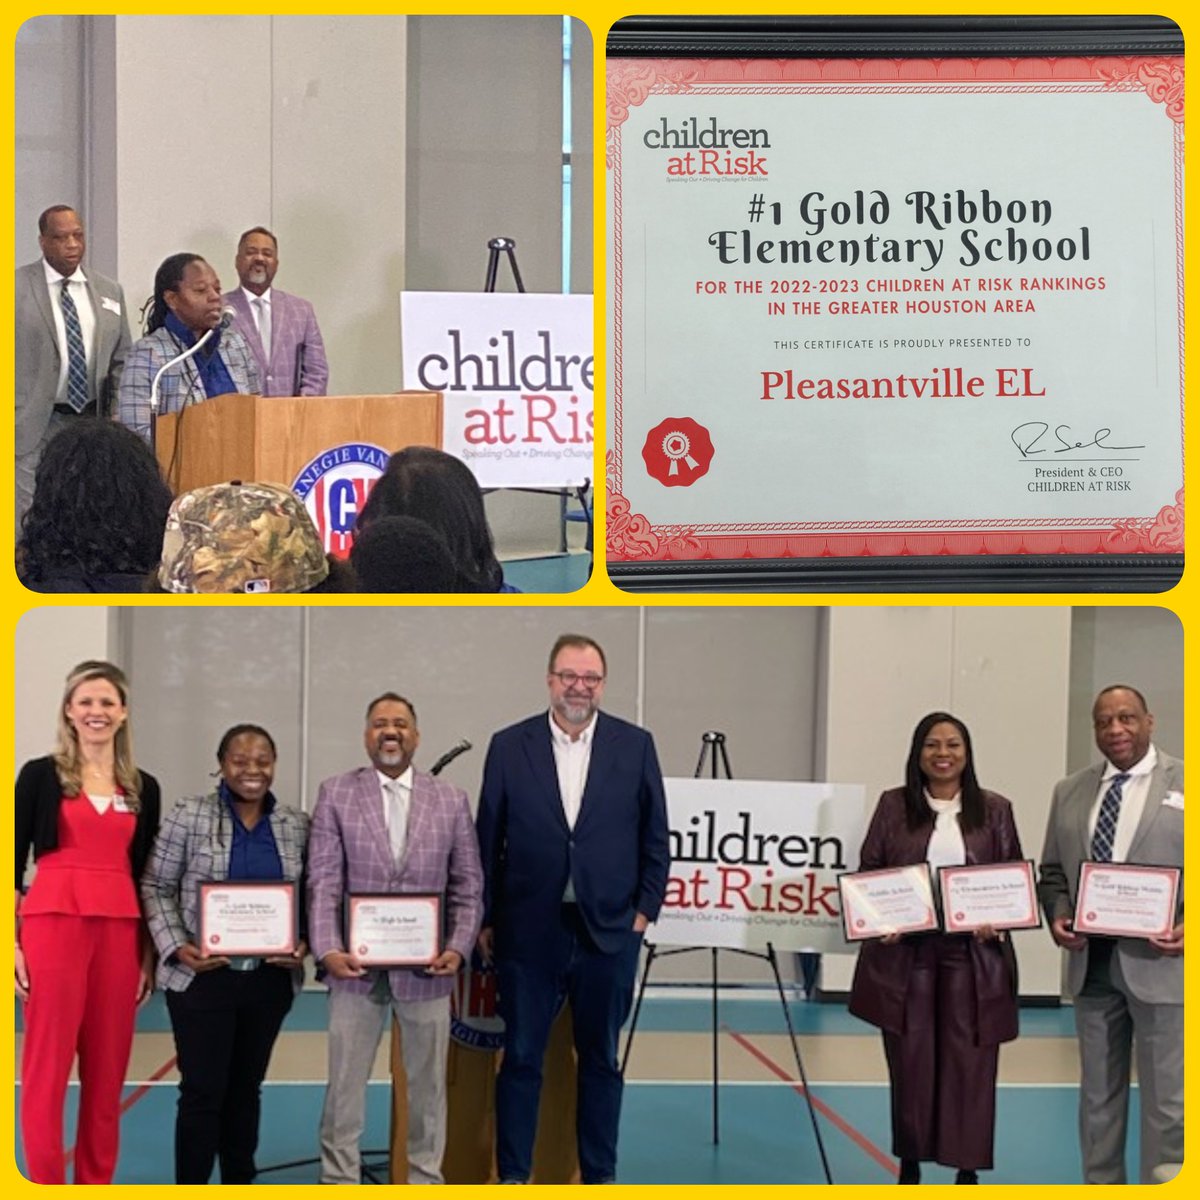 We at @PleasantvilleES are throughly honored and excited to be named the #1 Gold Ribbon Ribbon Elementary School in the Greater Houston area by @childrenatrisk! Gratitude to the faculty, staff, and students for always working toward #DestinationExcellence!